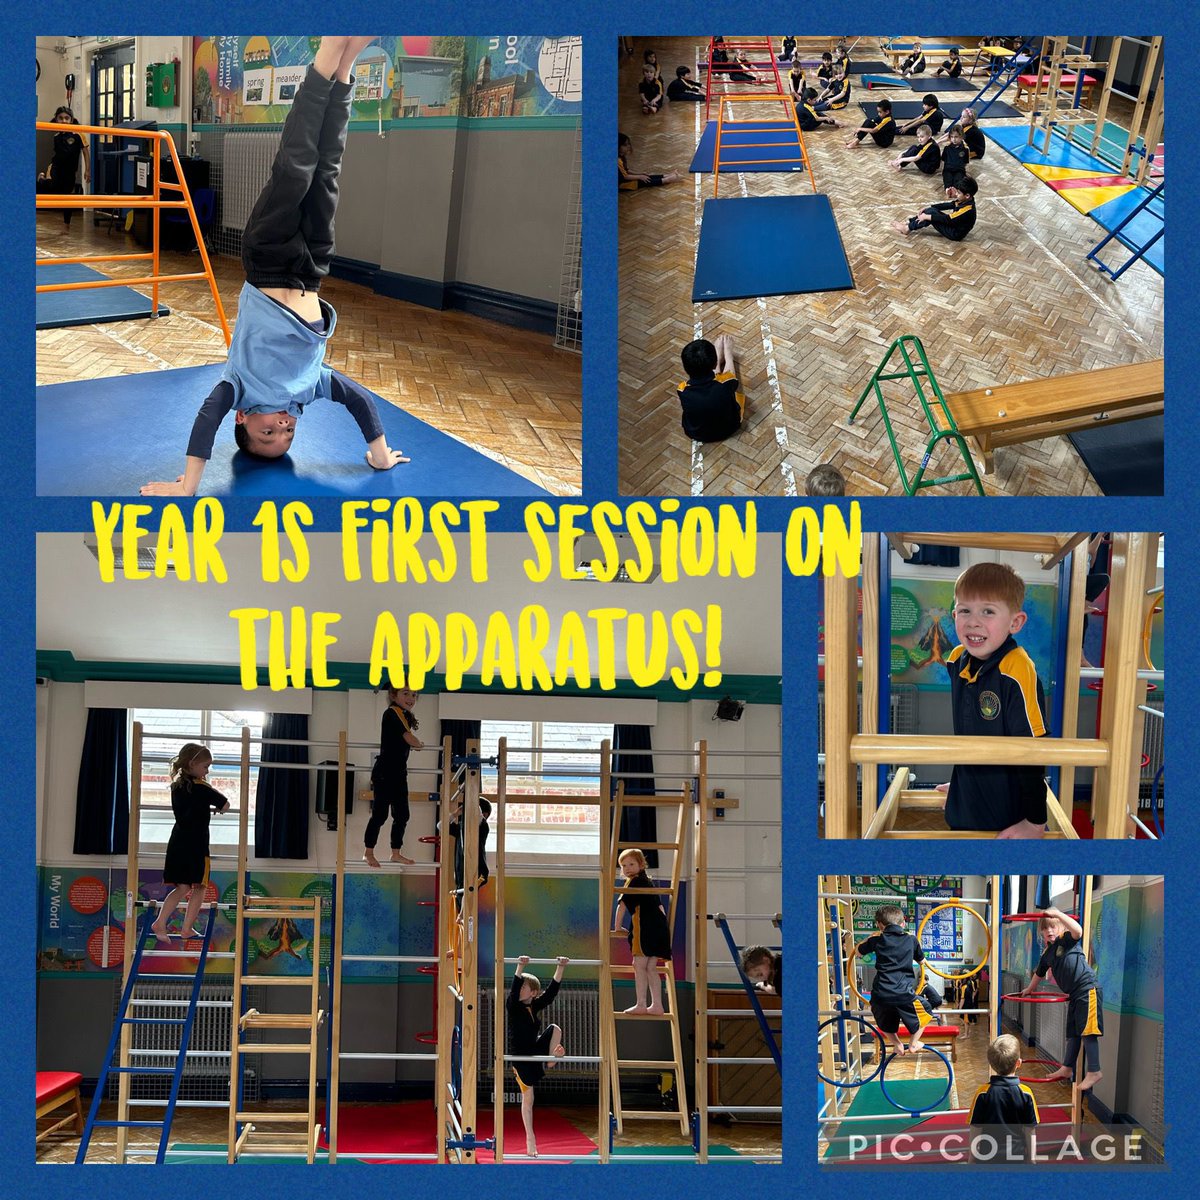 Y1 loved their first session using the gymnastics apparatus today! #Y1 #gymnastics #active #sport #PE #Wechallengeourselves 🟡